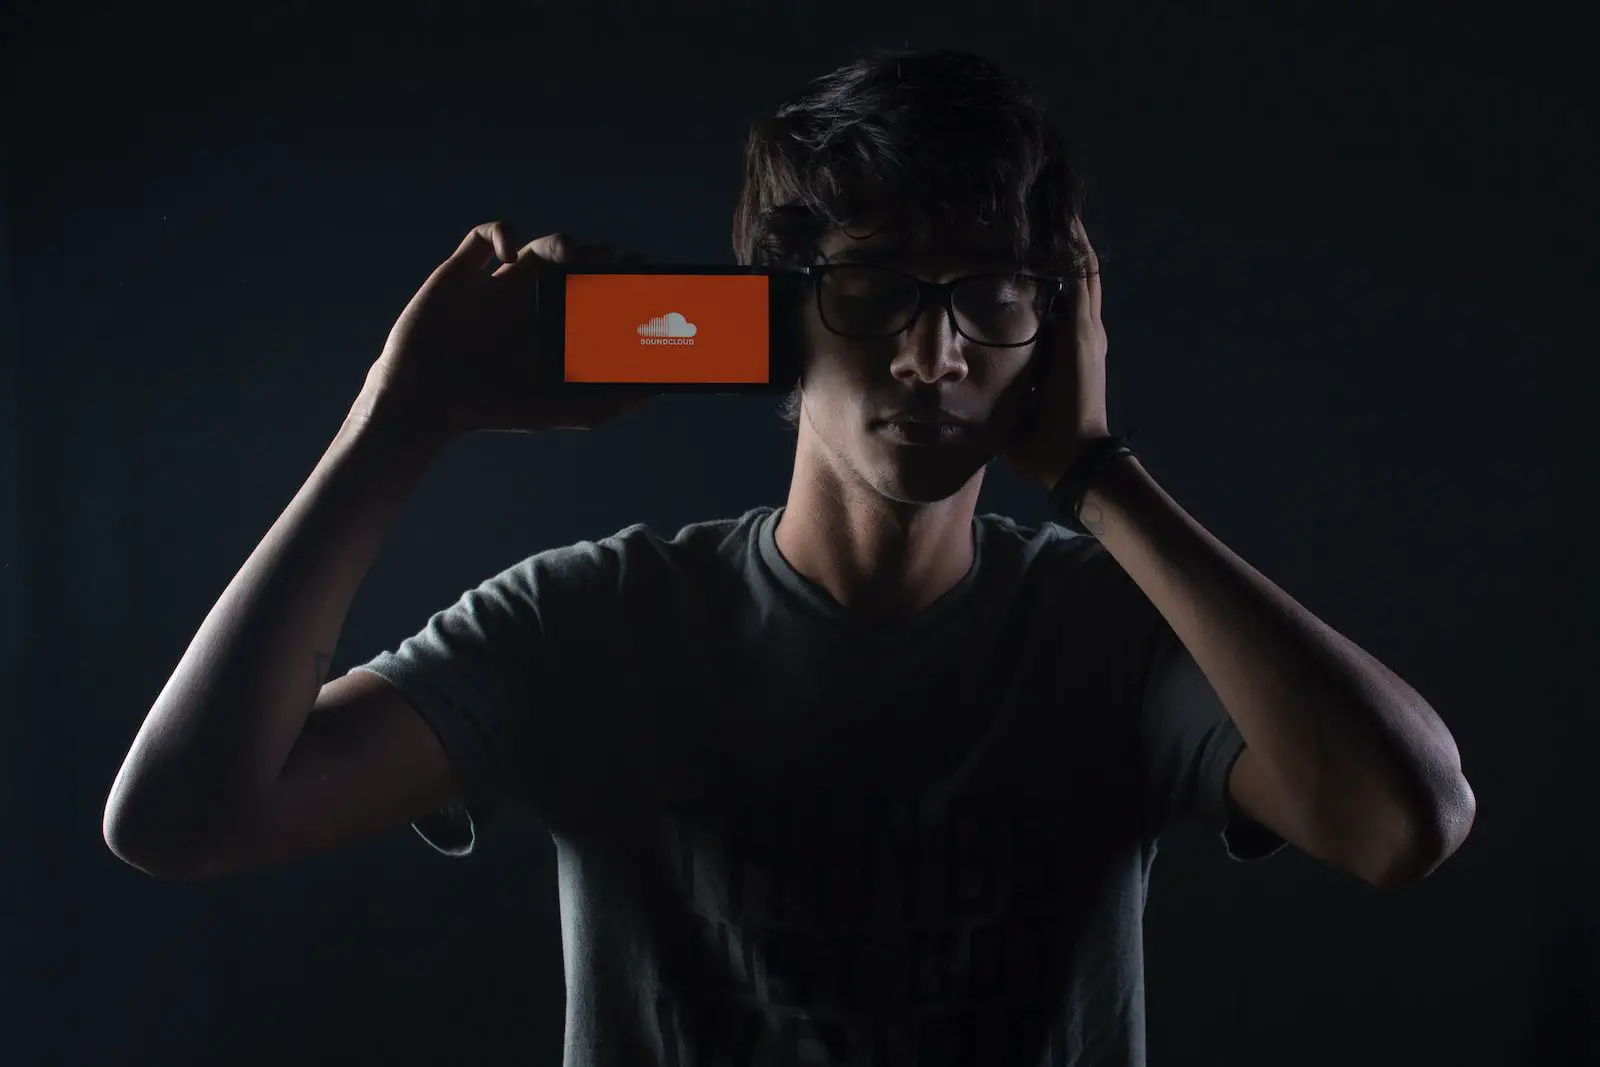 student listening to Soundcloud music on smartphone